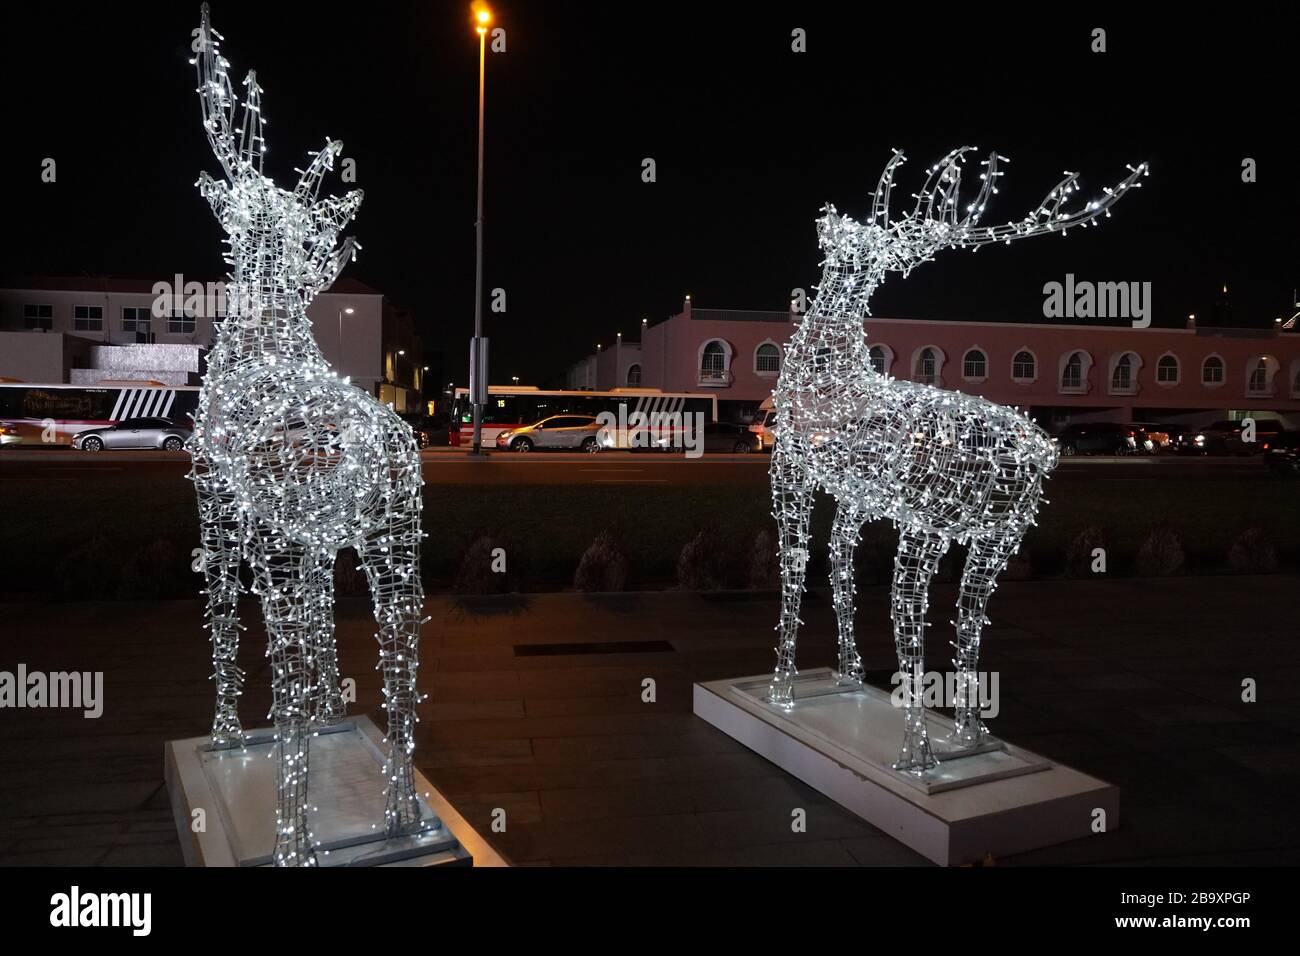 43 HQ Photos Wire Reindeer Decoration / Illuminated Wire Reindeer Christmas Decorations At Hetland Garden Centre Dumfries Youtube